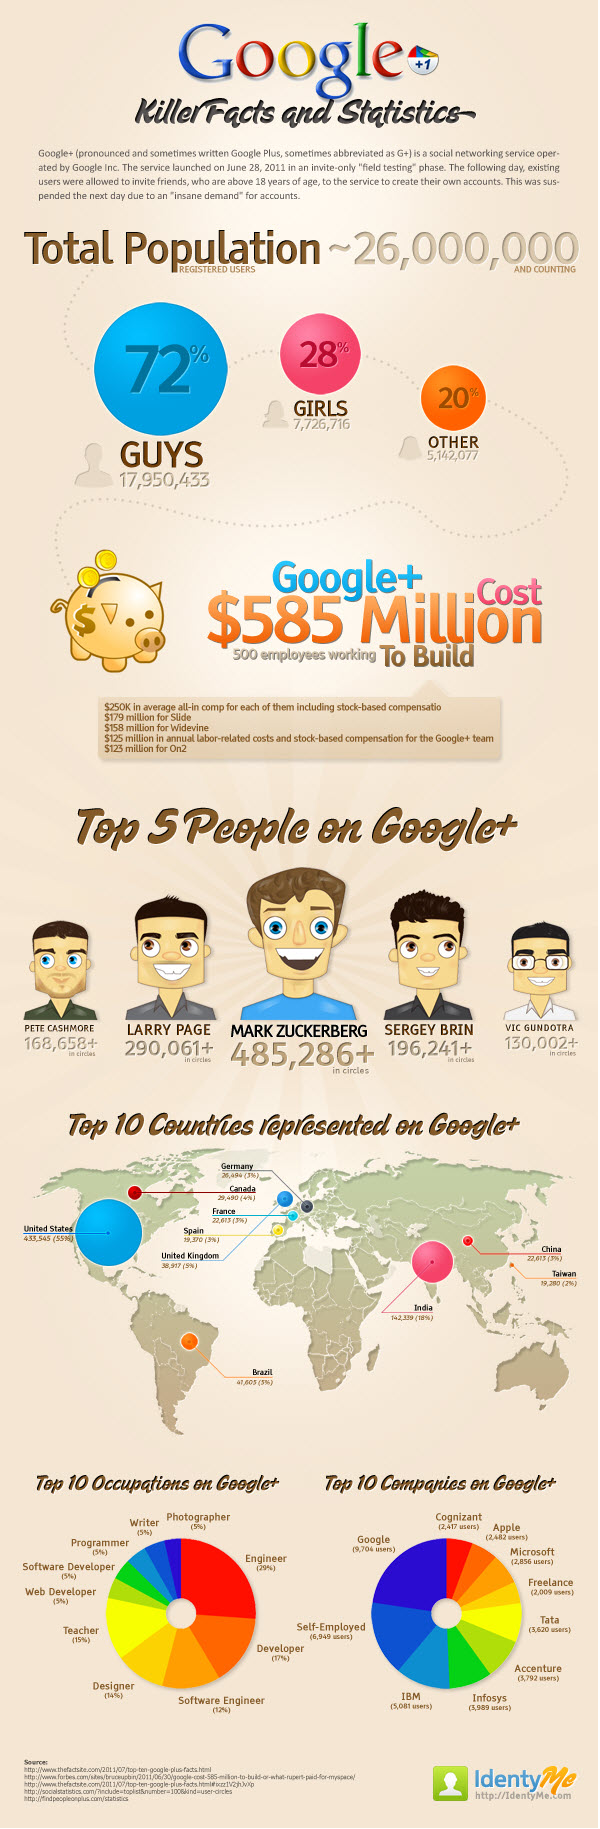 Google+ Killer Facts and Stats: Web Life Productions, Inc.